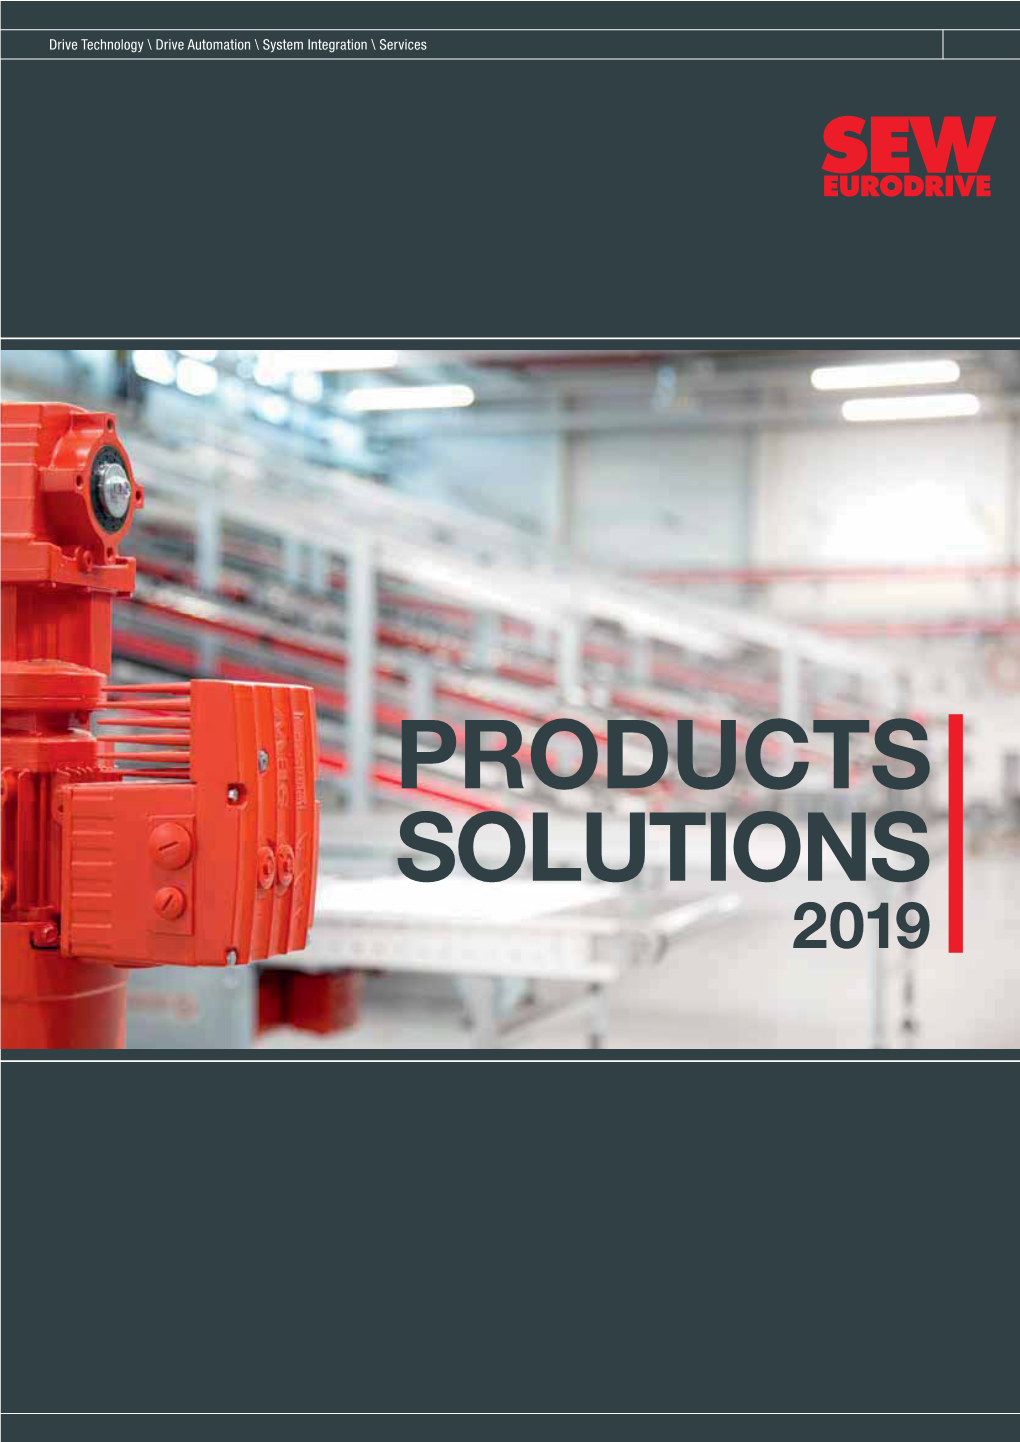 PRODUCTS SOLUTIONS 2019 2 SEW-EURODRIVE—Driving the World 3